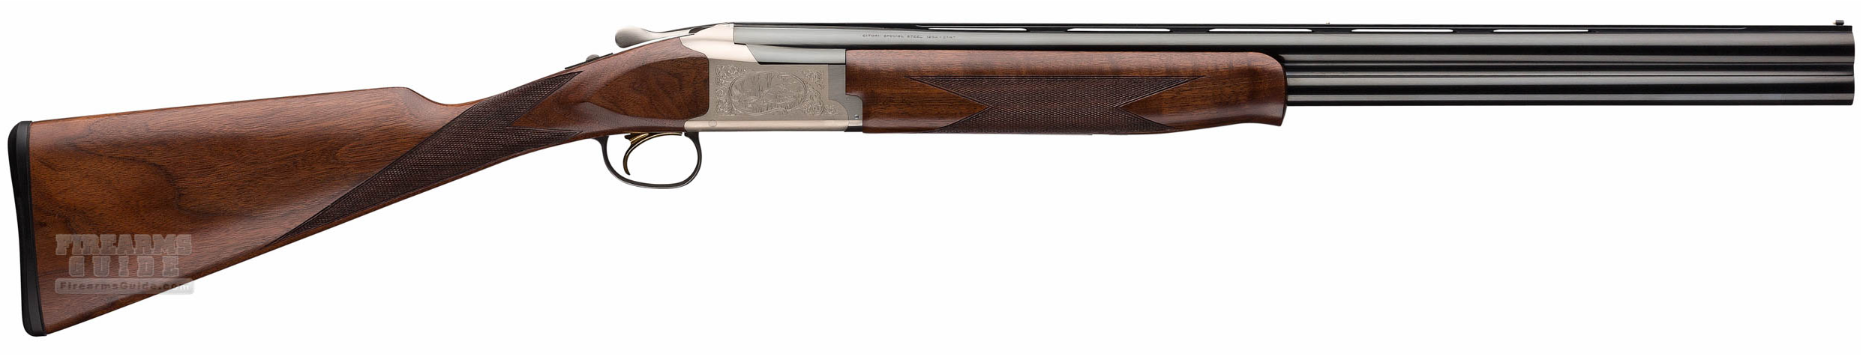 Browning 725 Feather Superlight